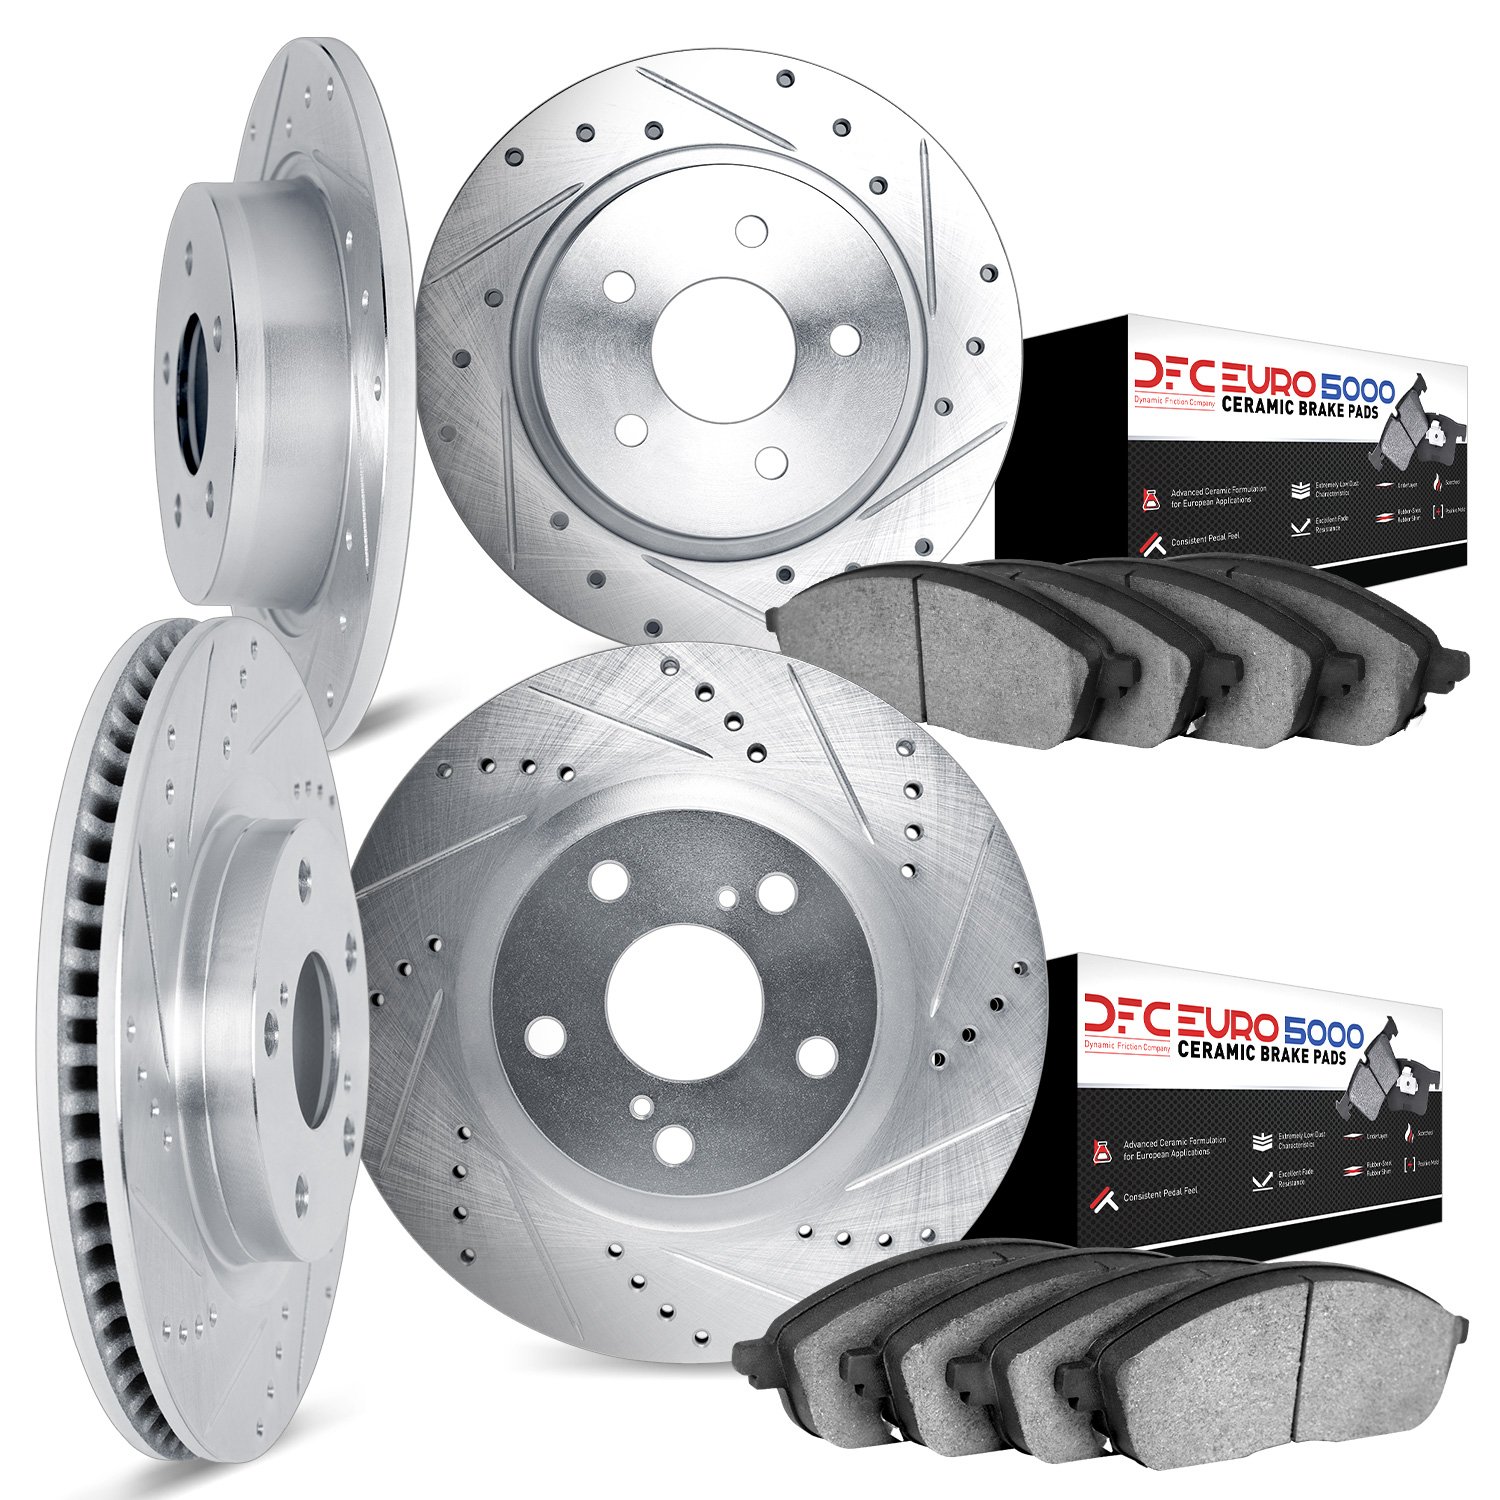 7604-07002 Drilled/Slotted Brake Rotors w/5000 Euro Ceramic Brake Pads Kit [Silver], 2014-2019 Mopar, Position: Front and Rear